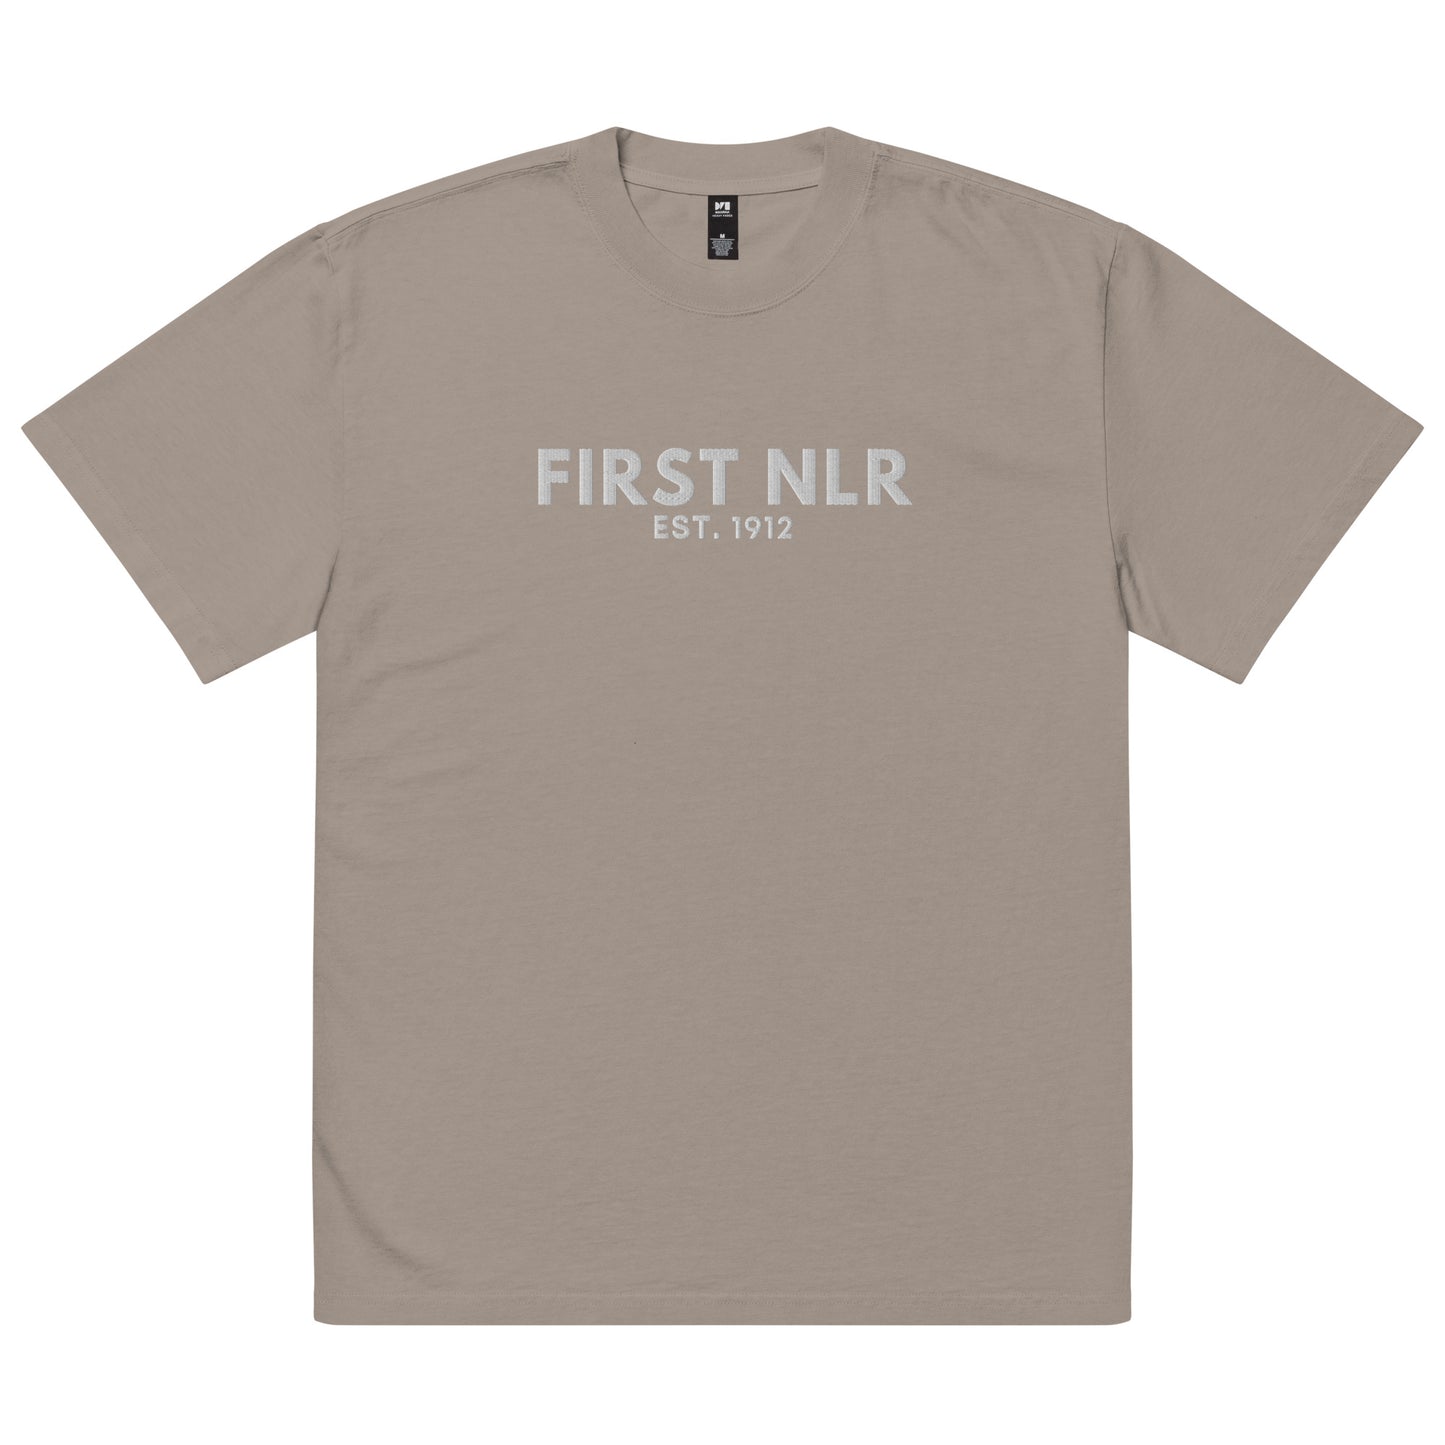 First NLR Embroidered (White) Oversized faded t-shirt